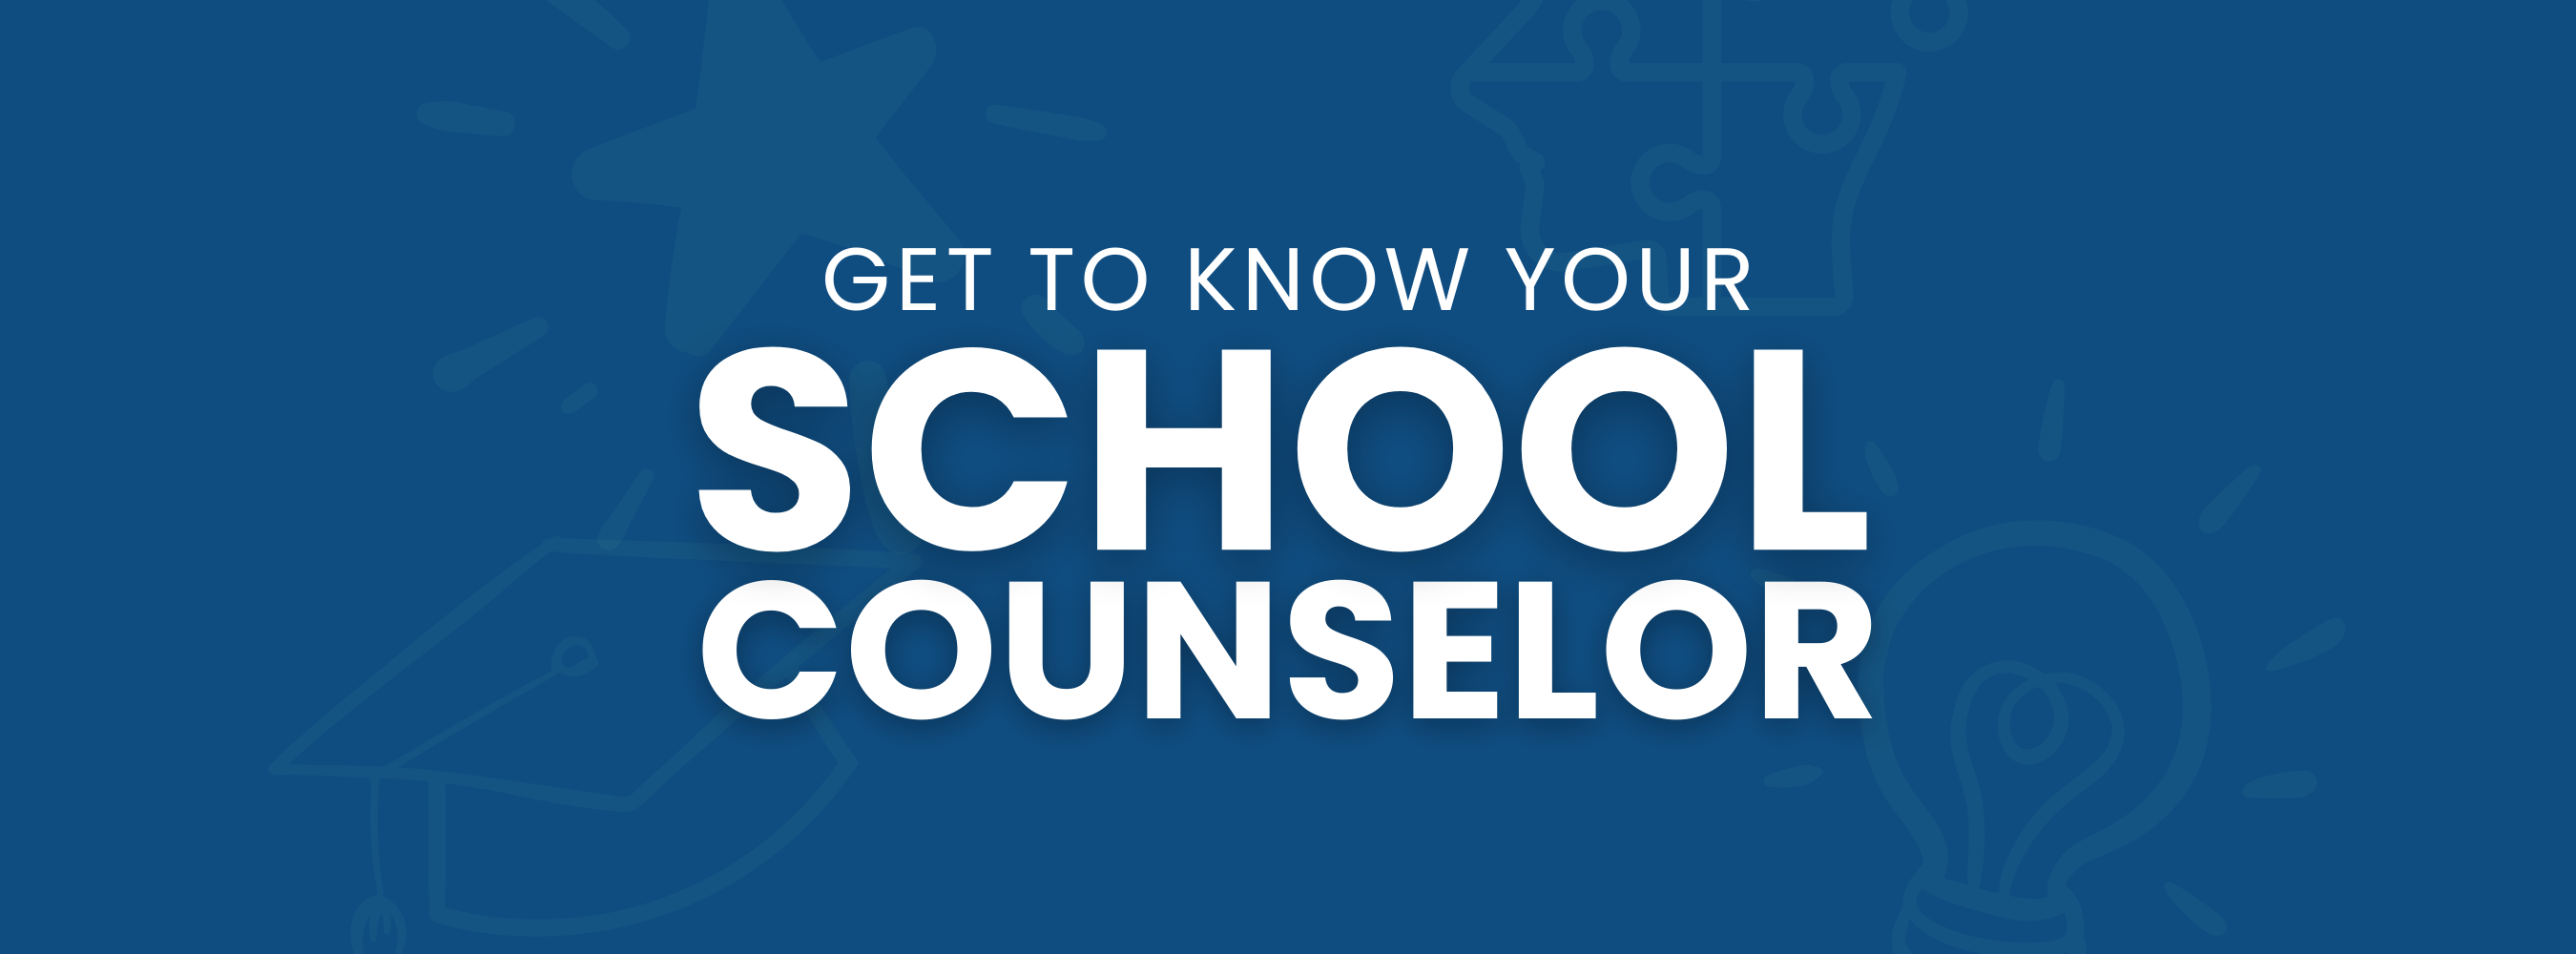 Get to know Your School Counselor